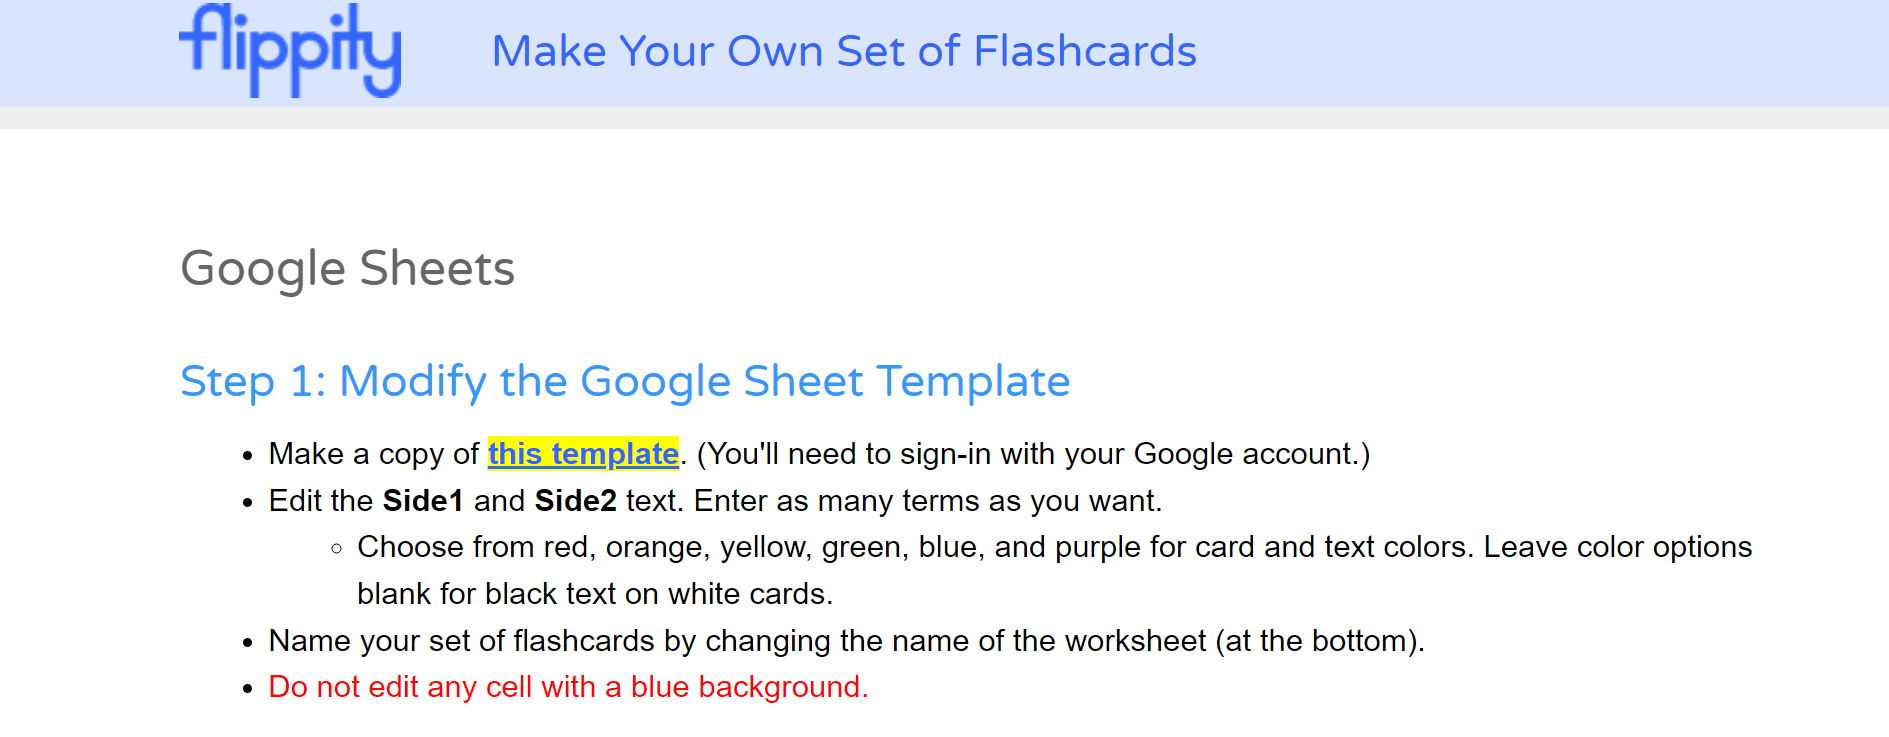 Read instructions on how to create flashcards on the Flippity website